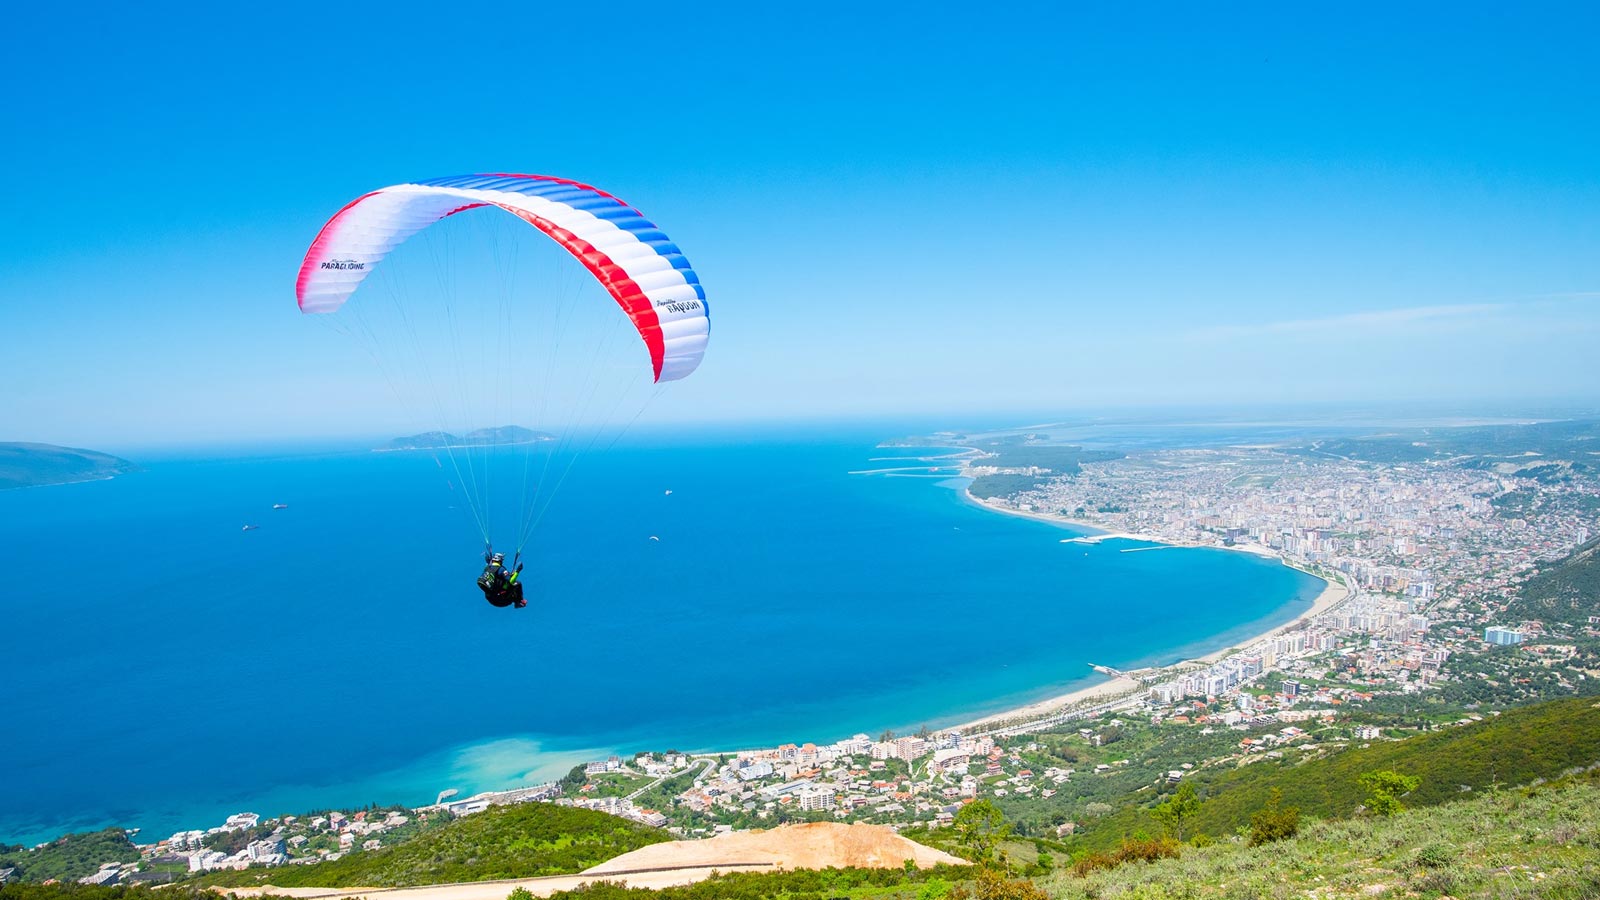 Raqoon by Papillon Paragliders